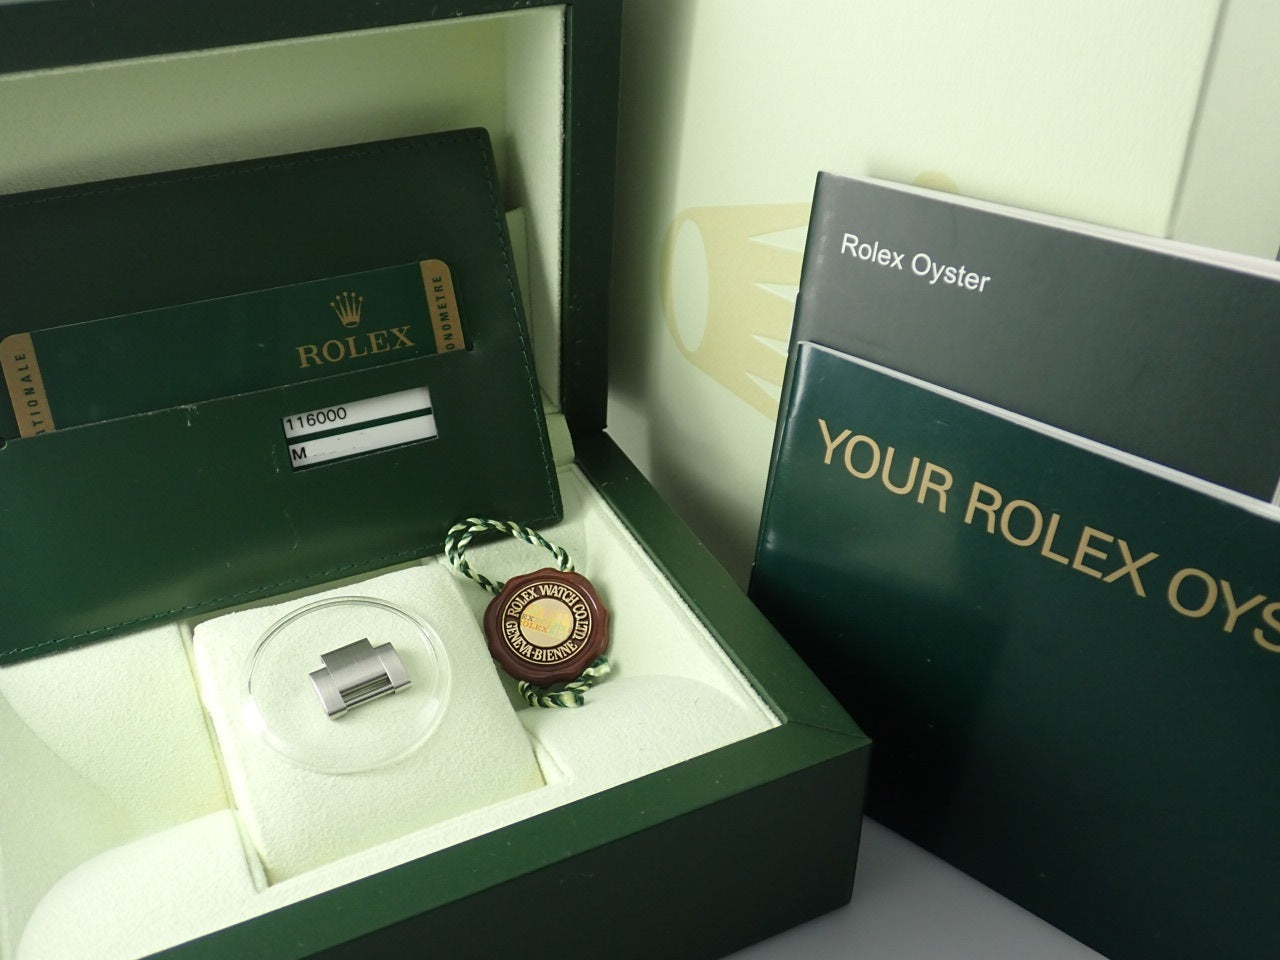 Rolex Oyster Perpetual 36 Japan Limited Edition &lt;Warranty, Box, etc.&gt;